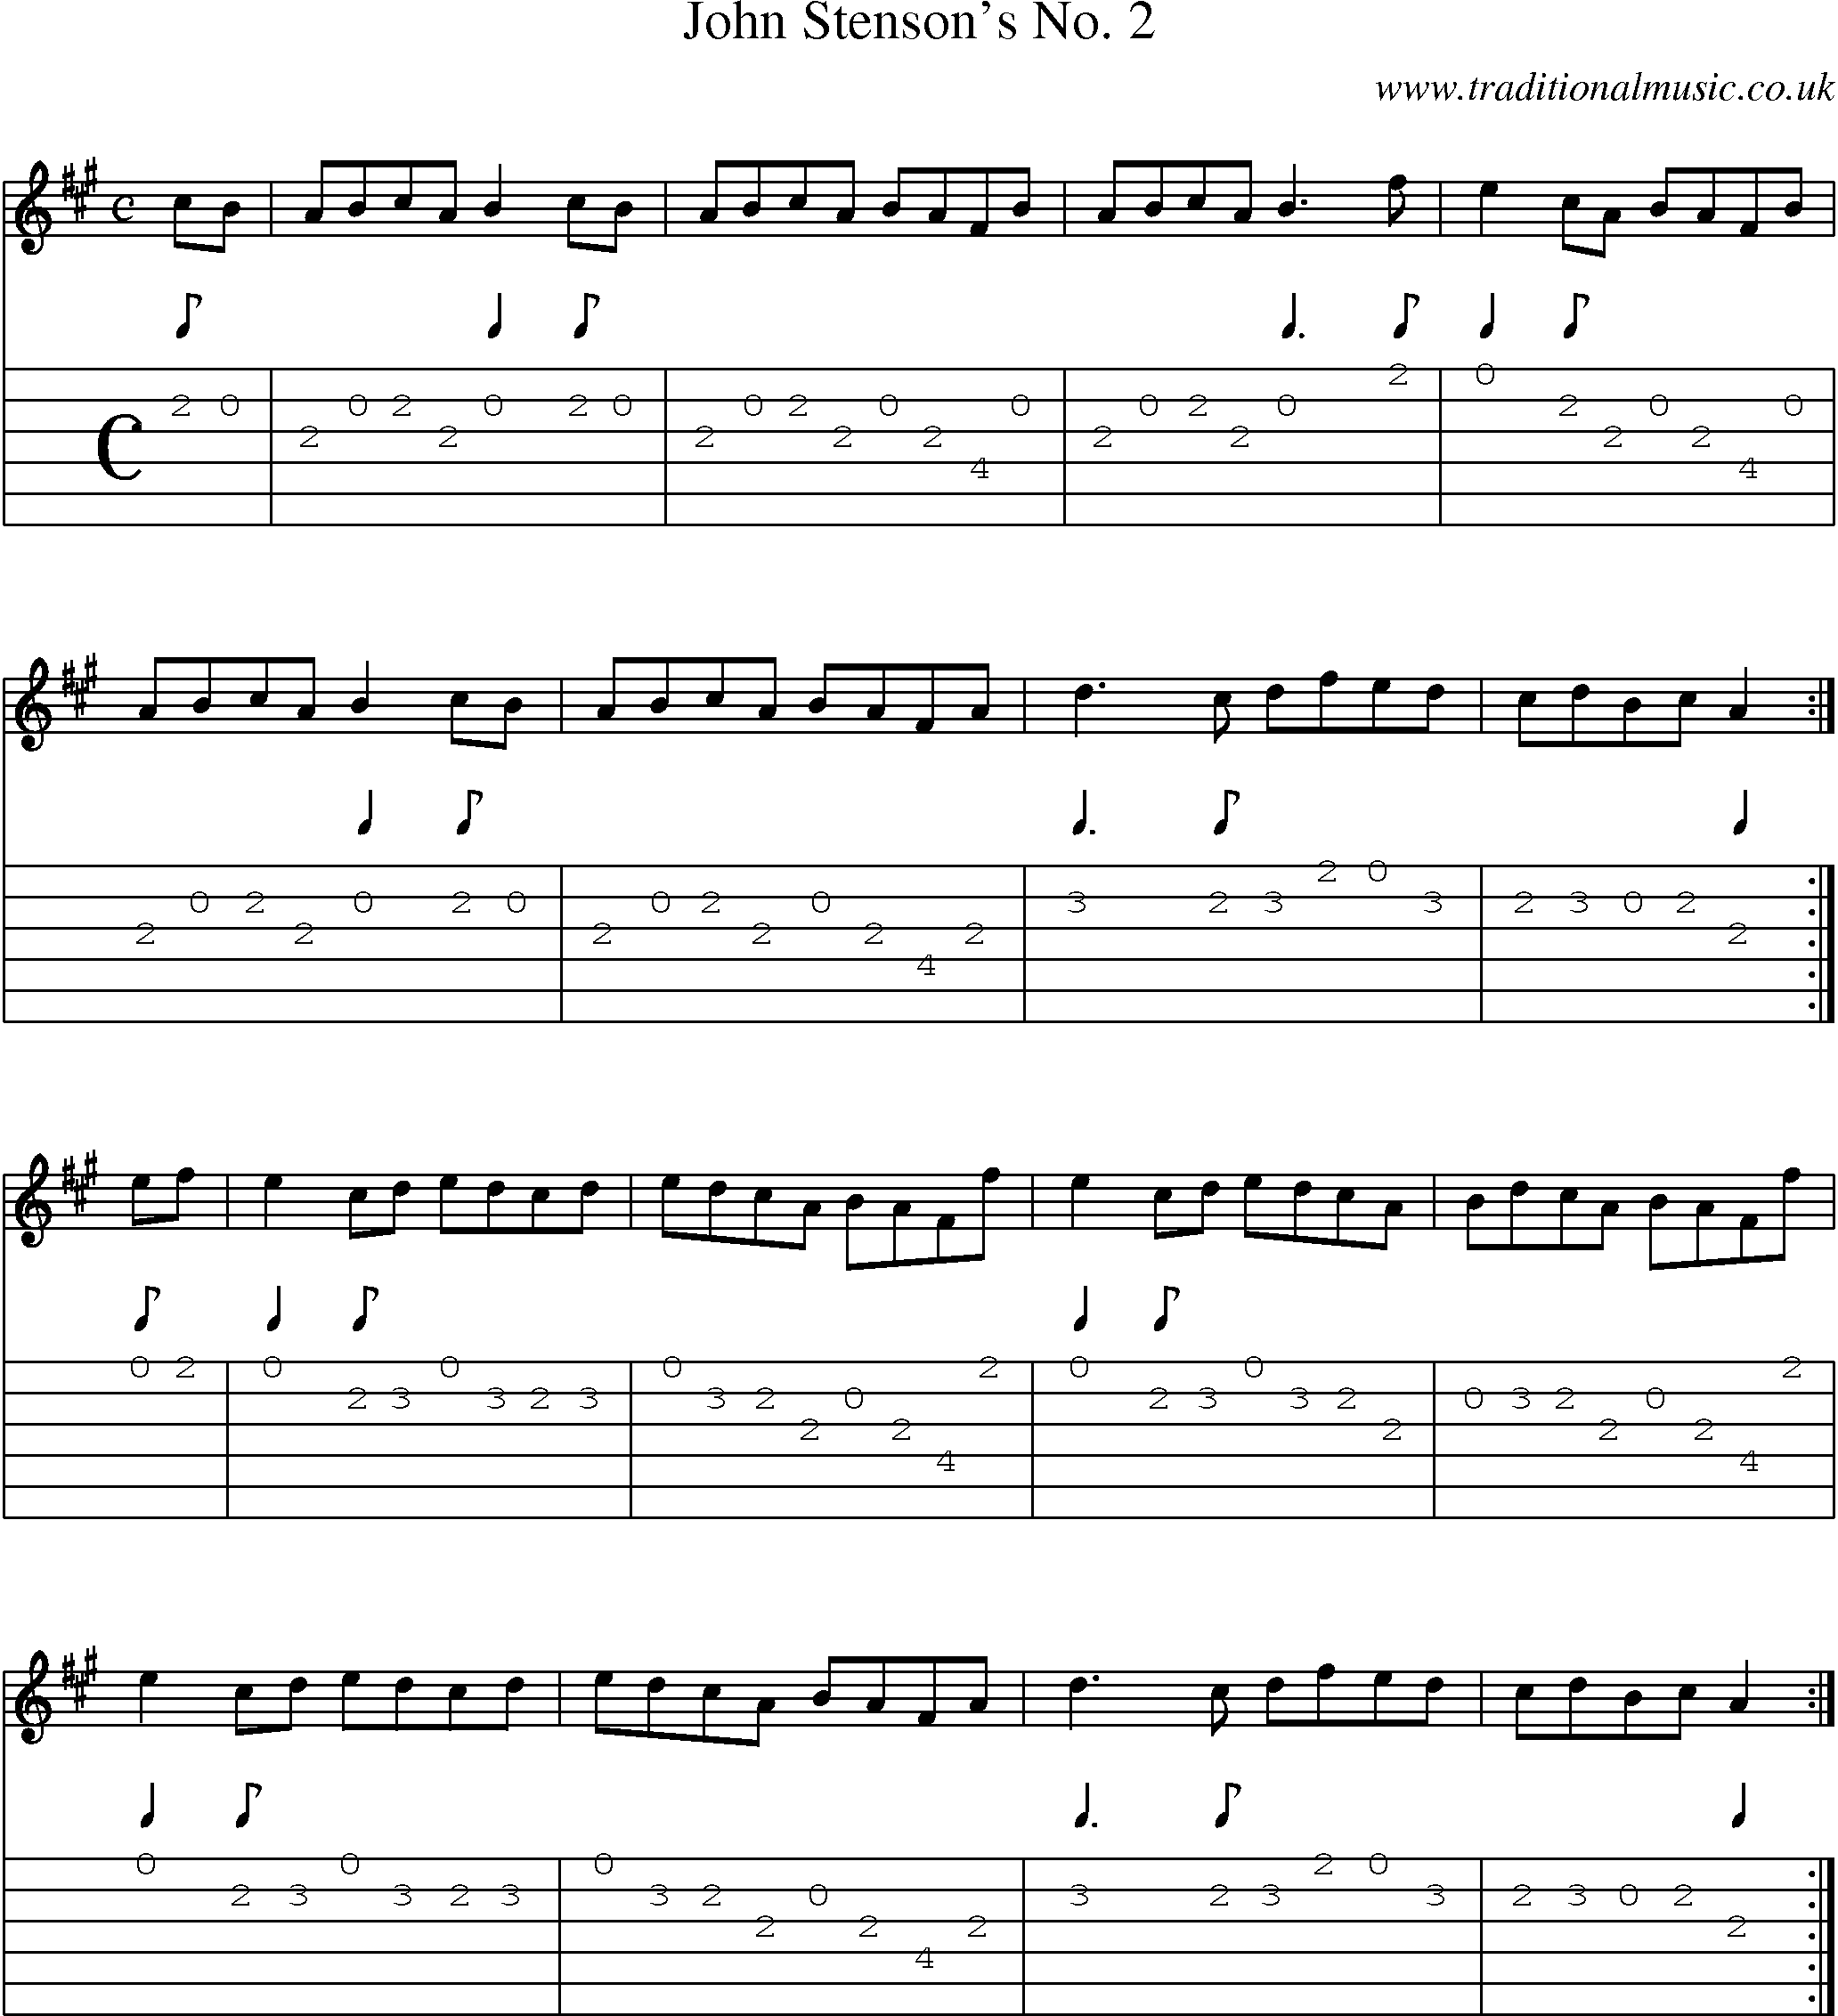 Music Score and Guitar Tabs for John Stensons No 2